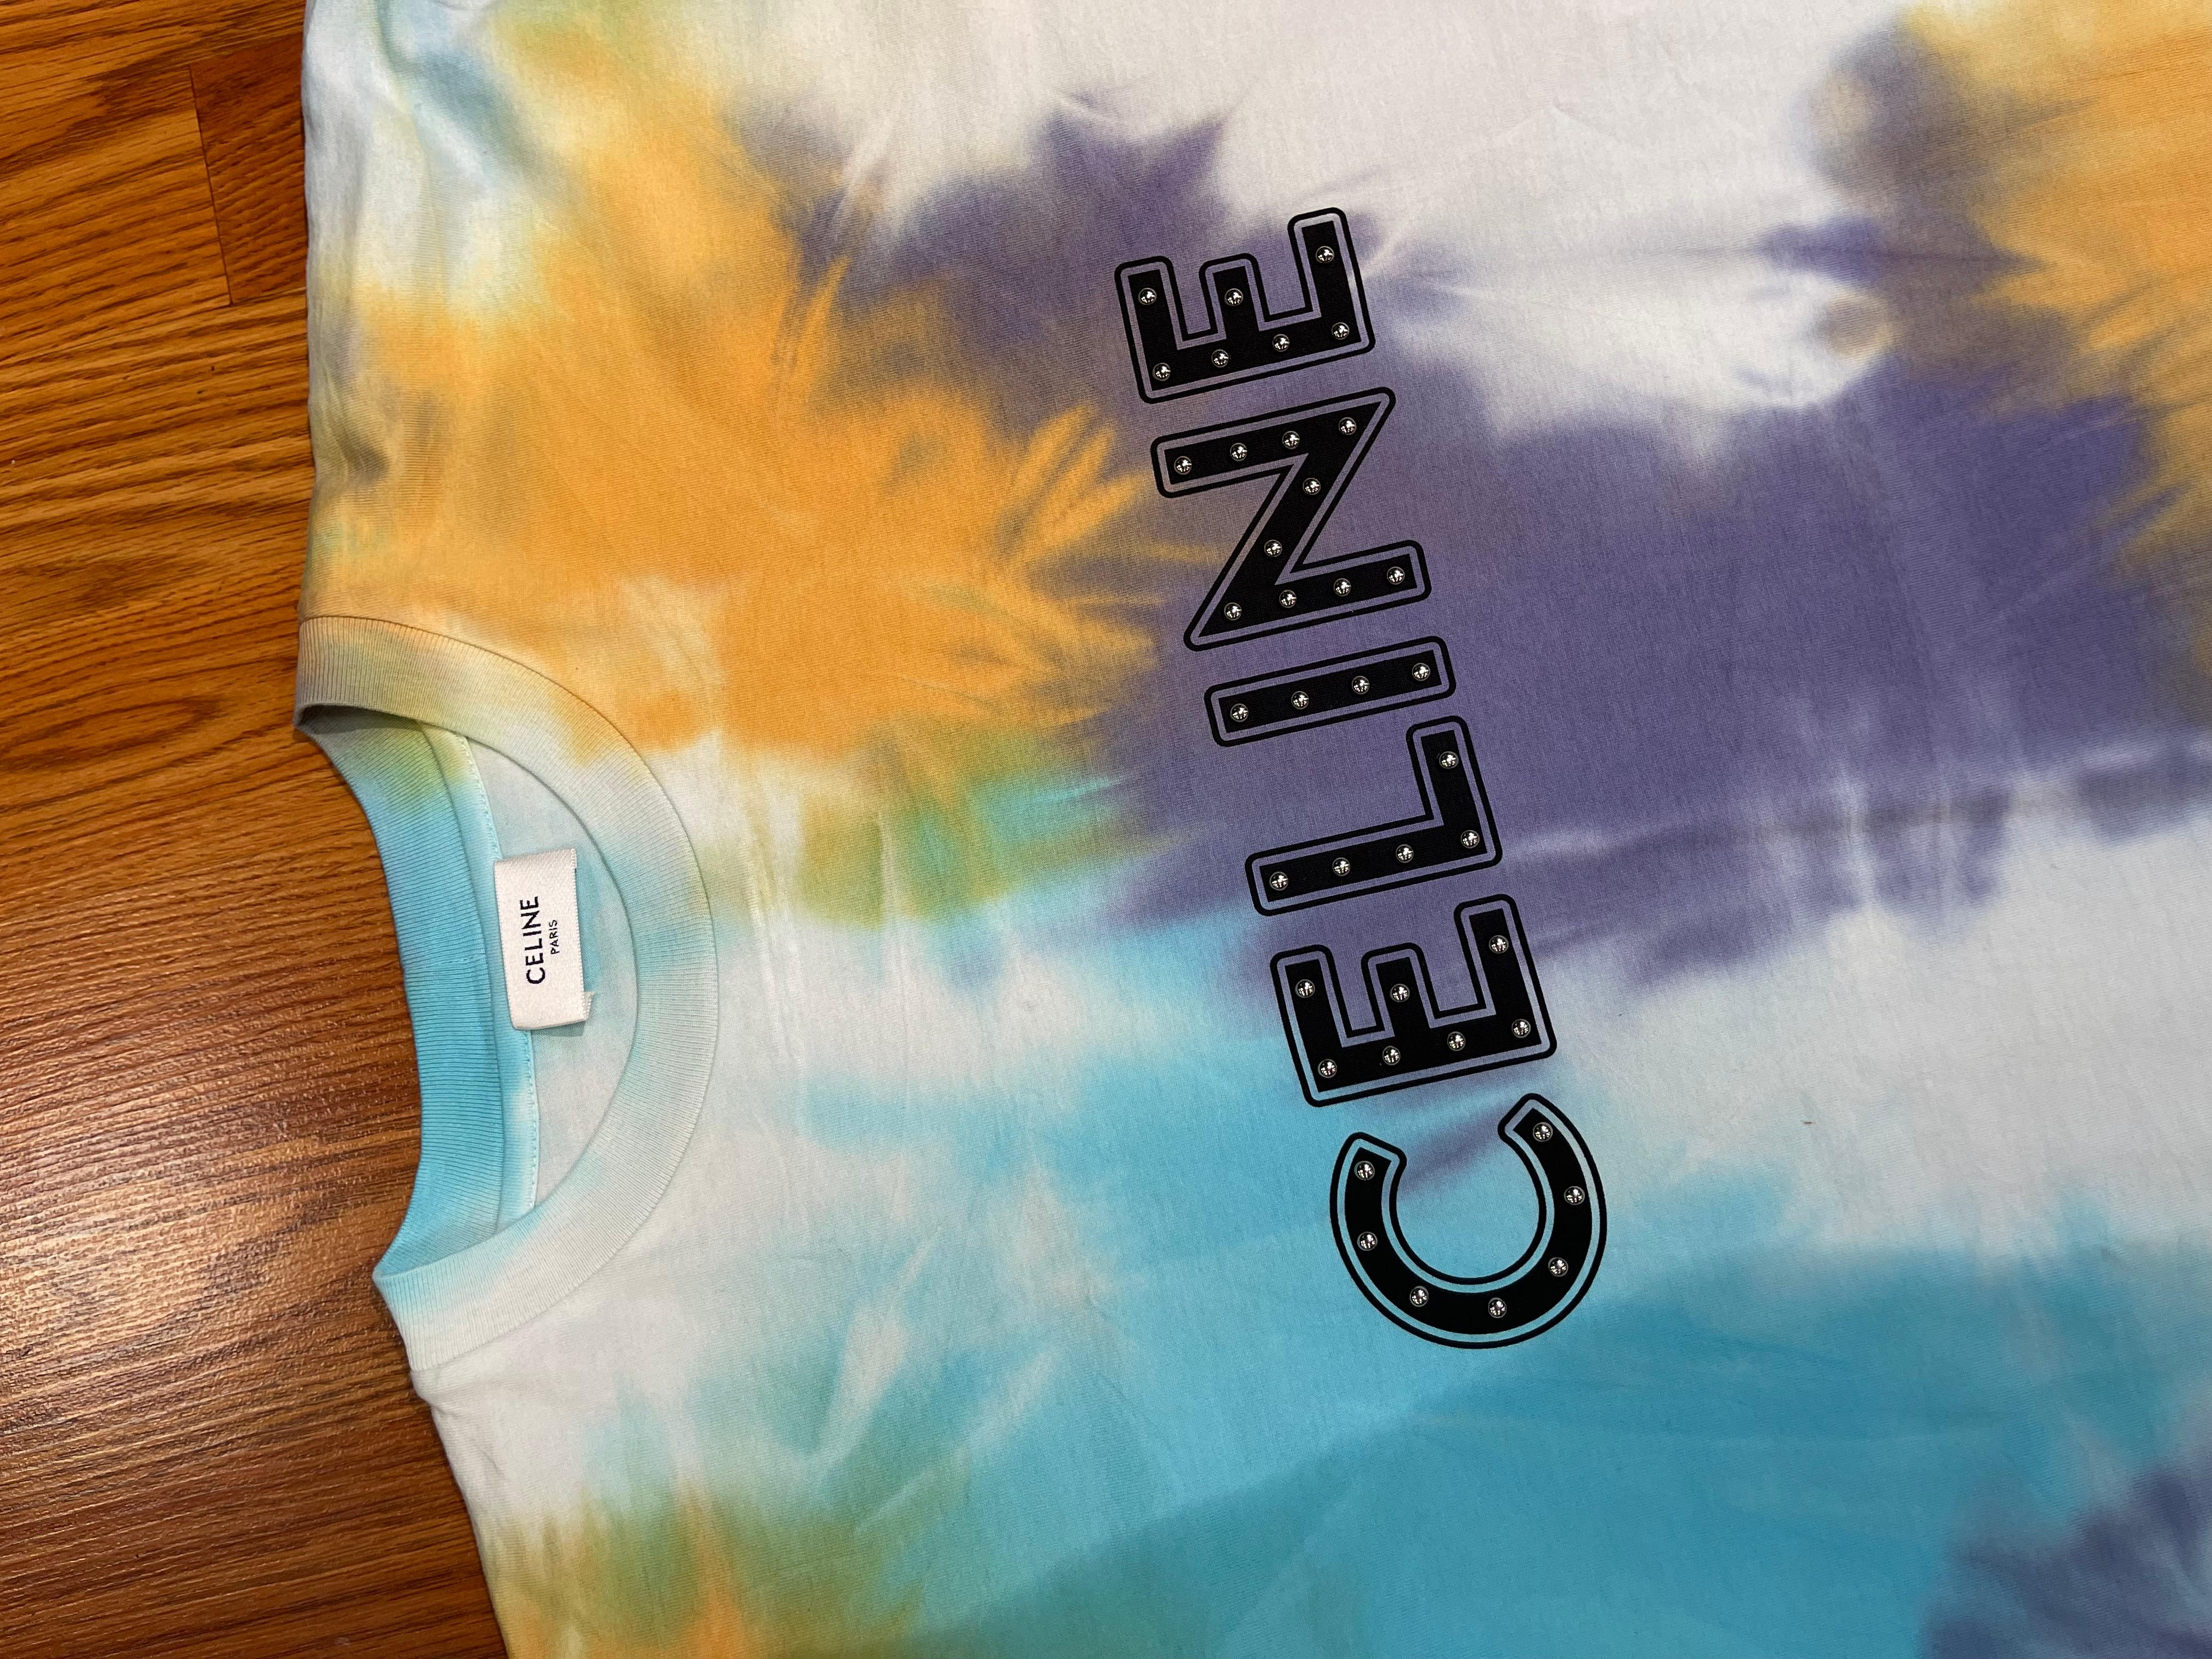 Celine Studded Logo Tee
Tie Dye color

Size Small
Brand new

Rare and sold out tee

Measurements:
Chest: 21